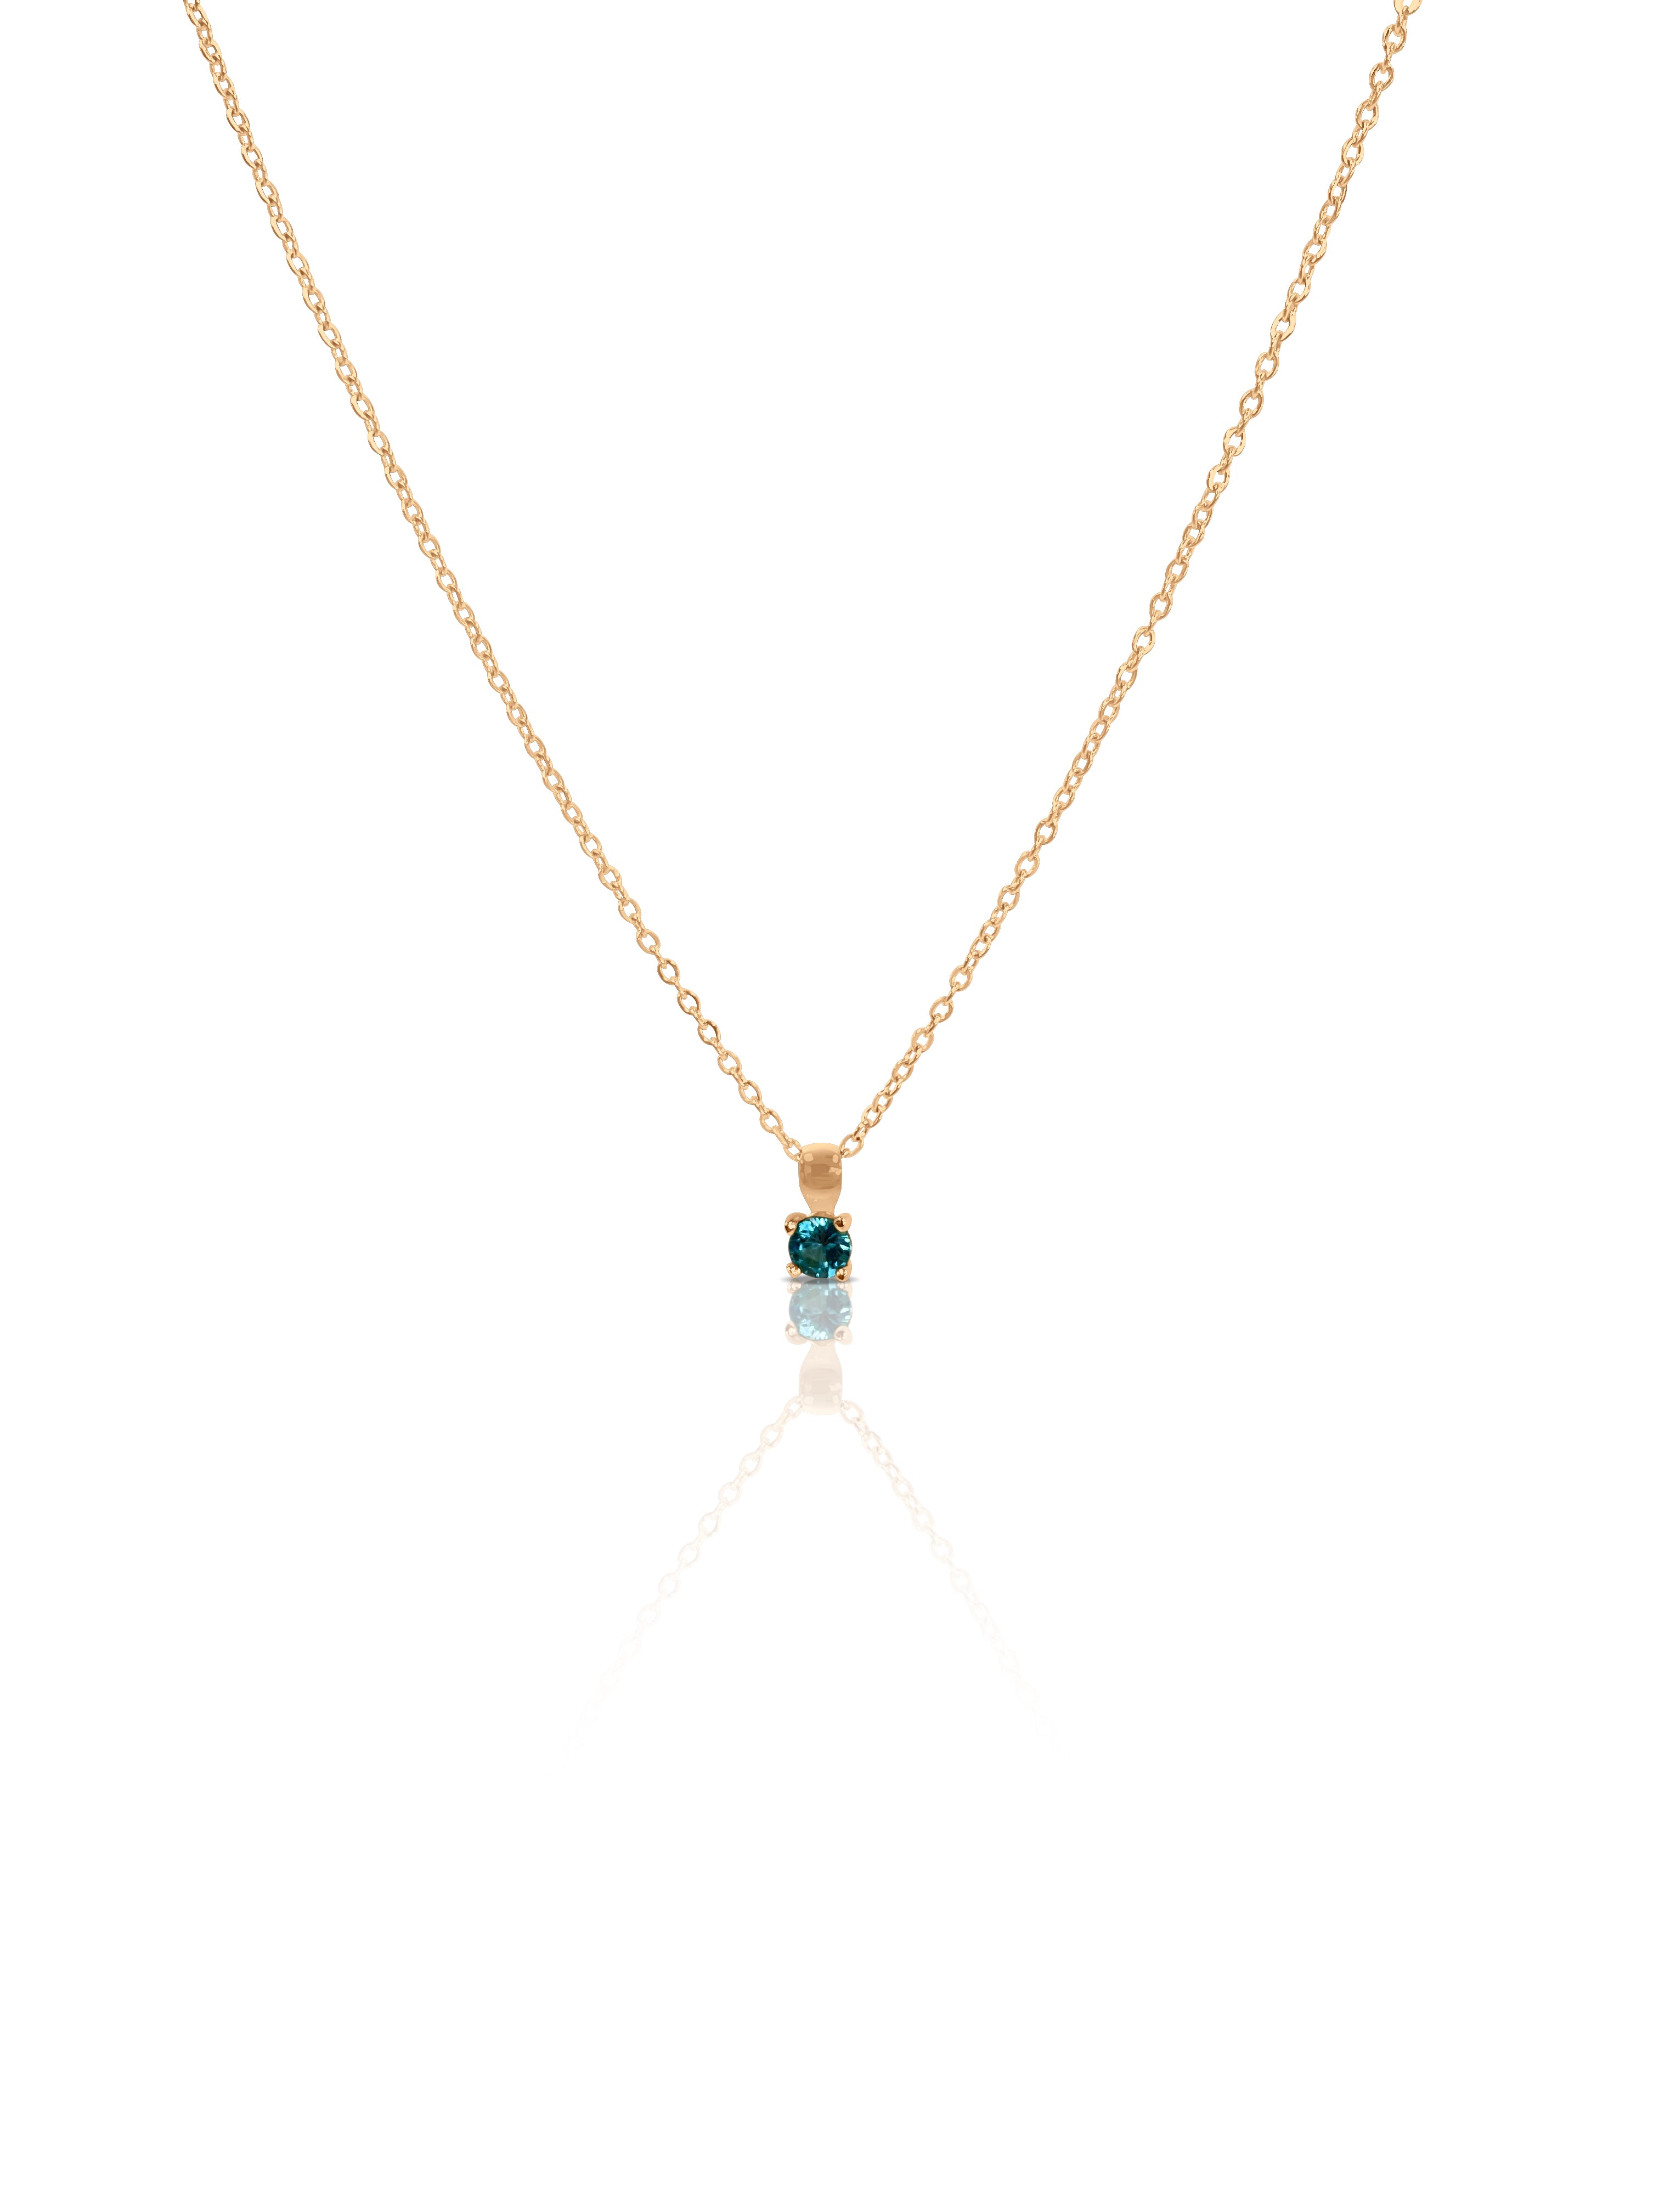 SALE - Leah Small Birthstone Necklace